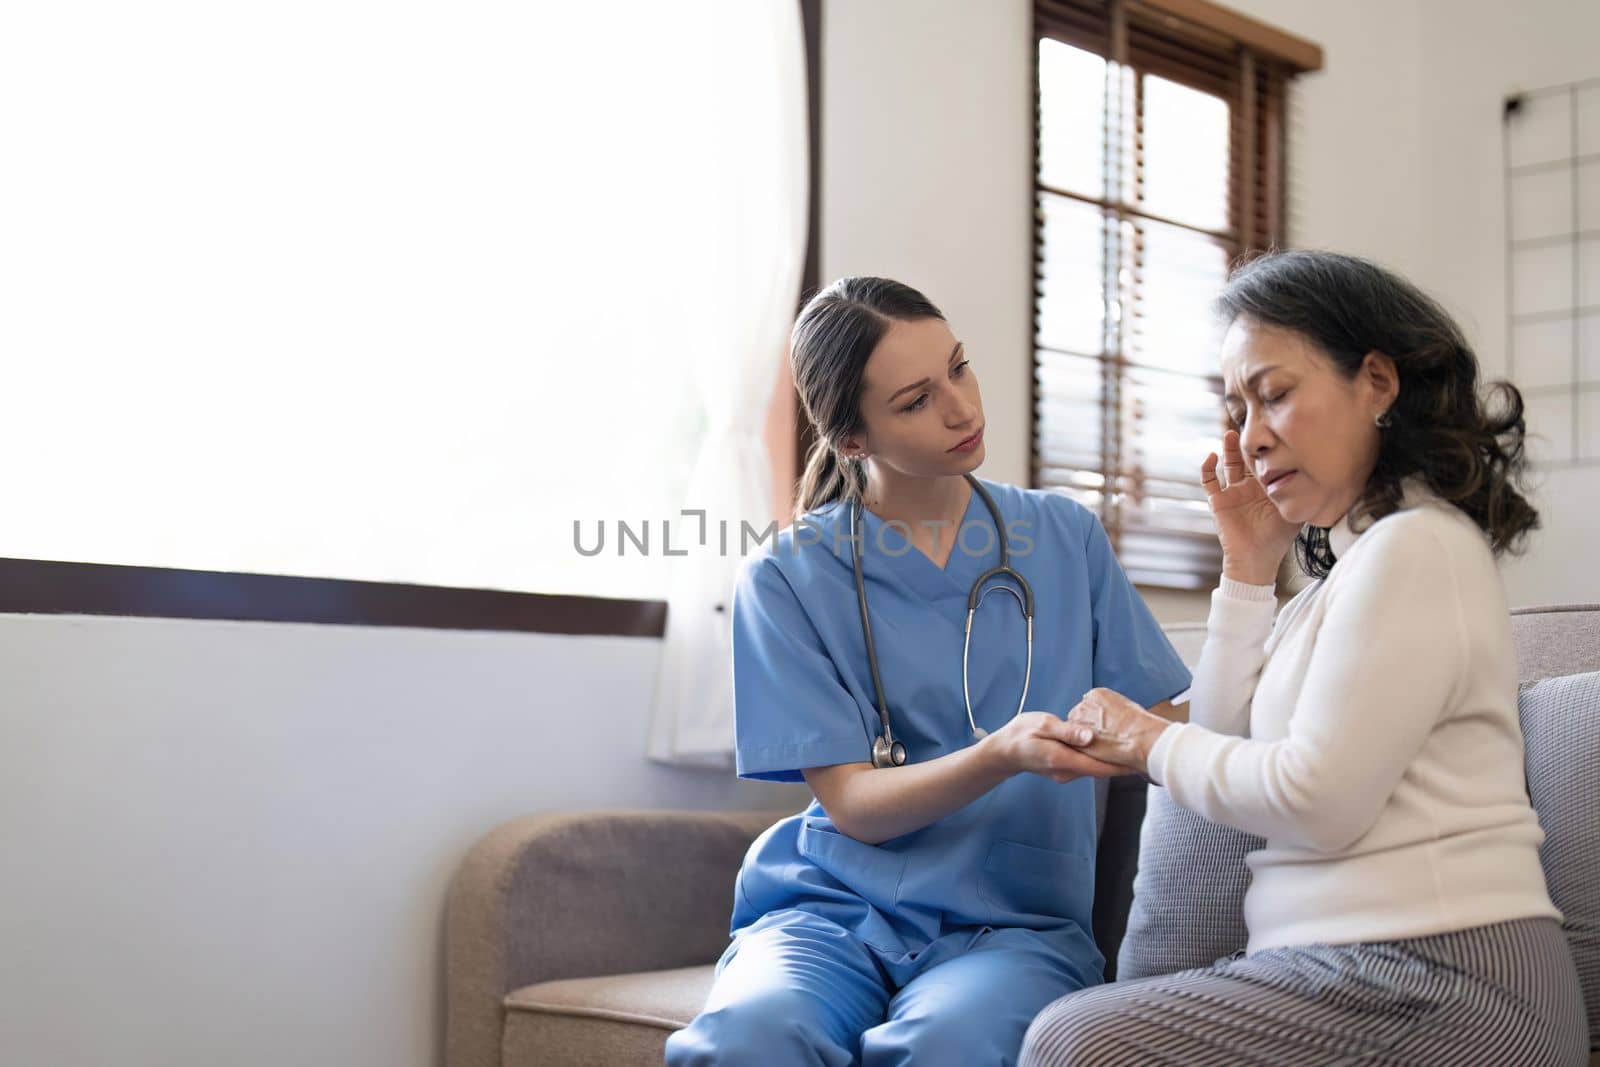 Female nurse visit old grandmother patient at home listen to complains concerns, attentive young woman doctor consulting mature senior grandma, elderly medical healthcare concept.